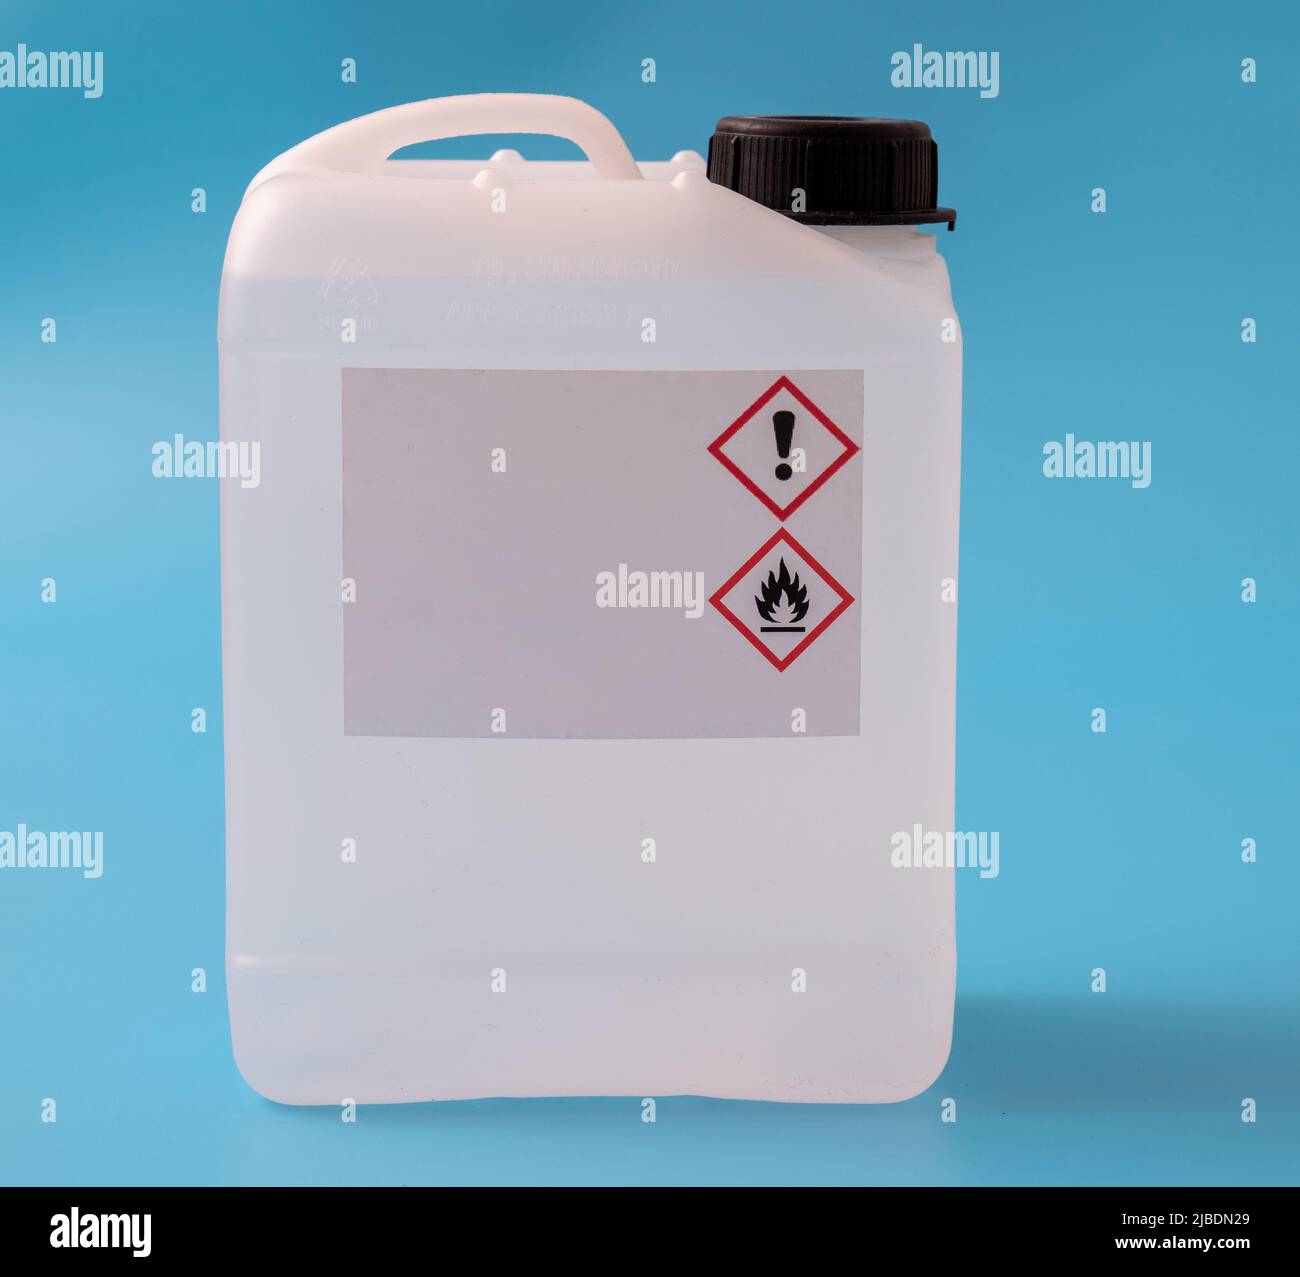 plastic canister with hazard symbols on blue background Stock Photo